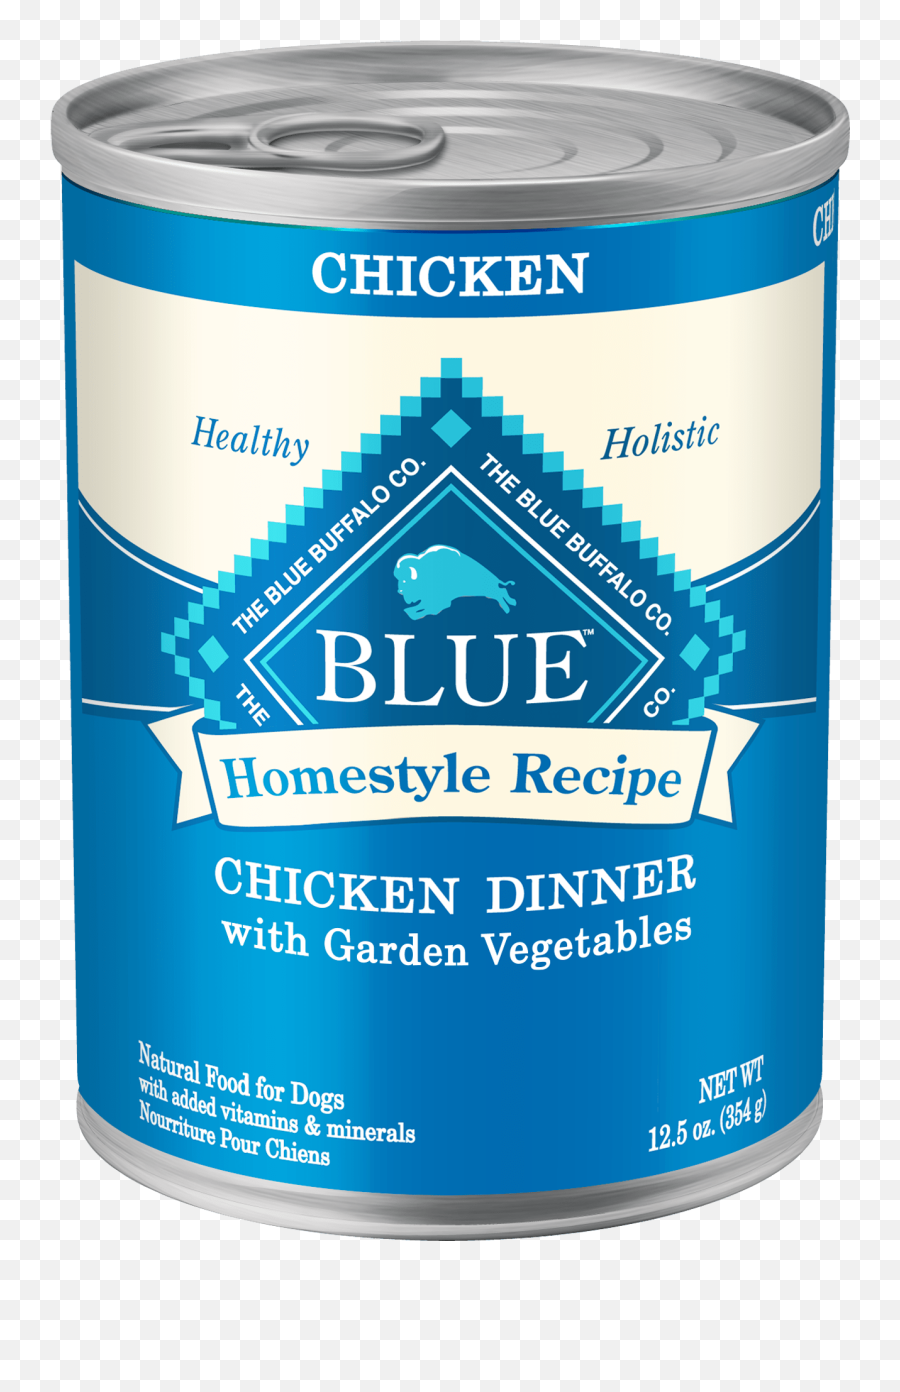 Blue Buffalo Homestyle Recipe - Blue Buffalo Png,Icon Variant Etched Blue